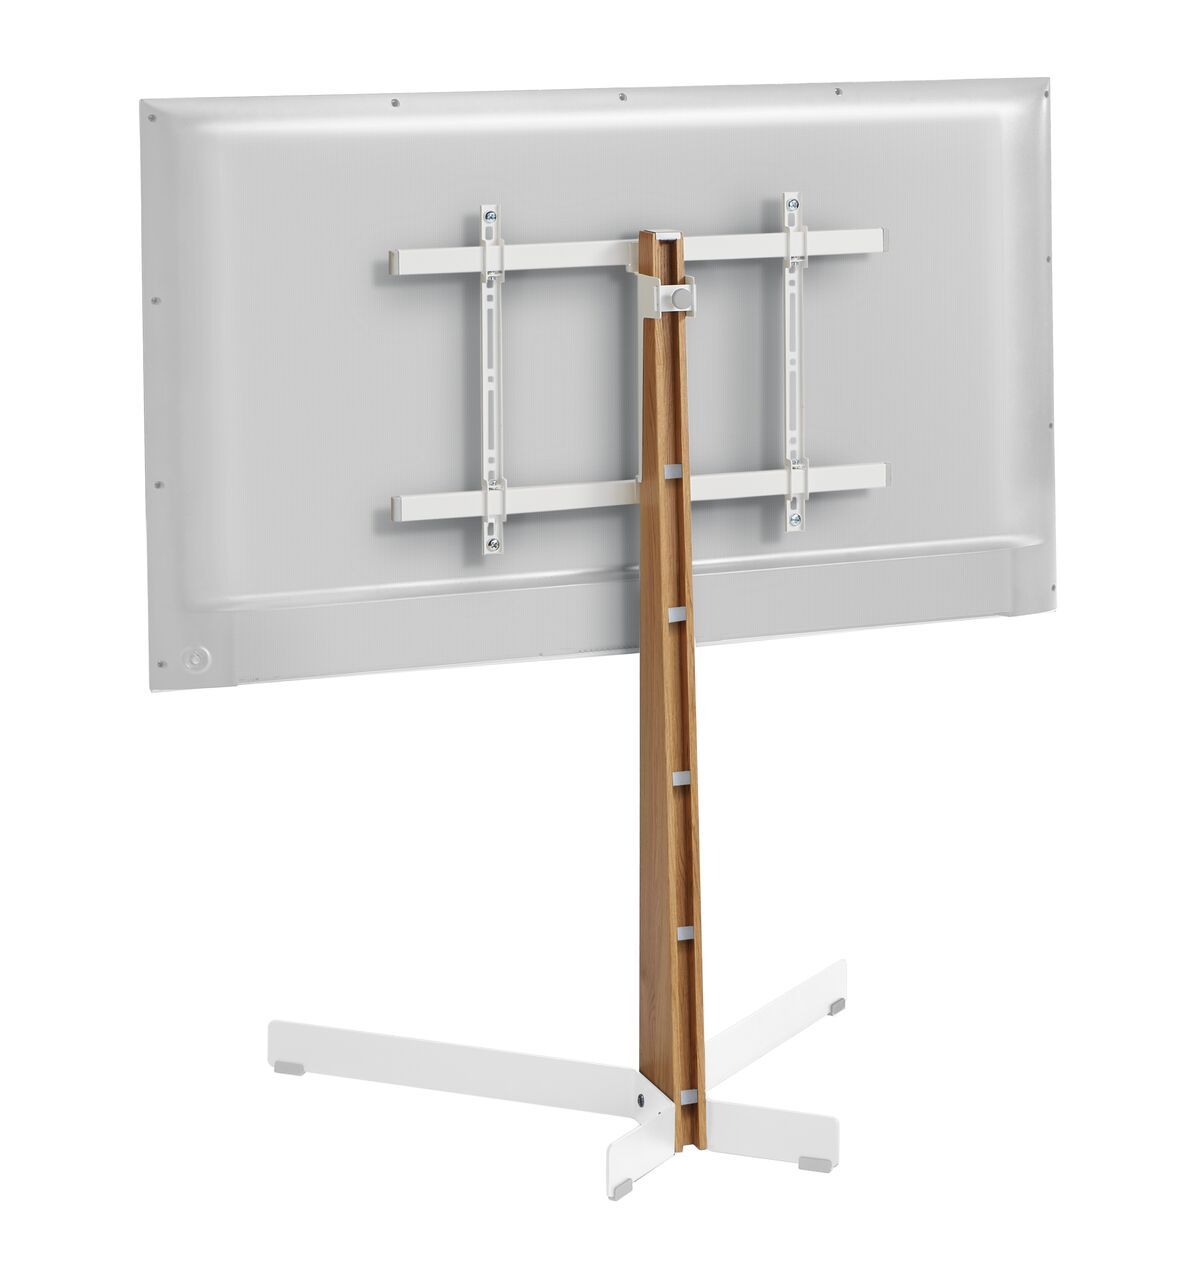 Vogel's TVS 3695 TV Floor Stand (white) - Suitable for 40 up to 77 inch TVs up to 50 kg - Application